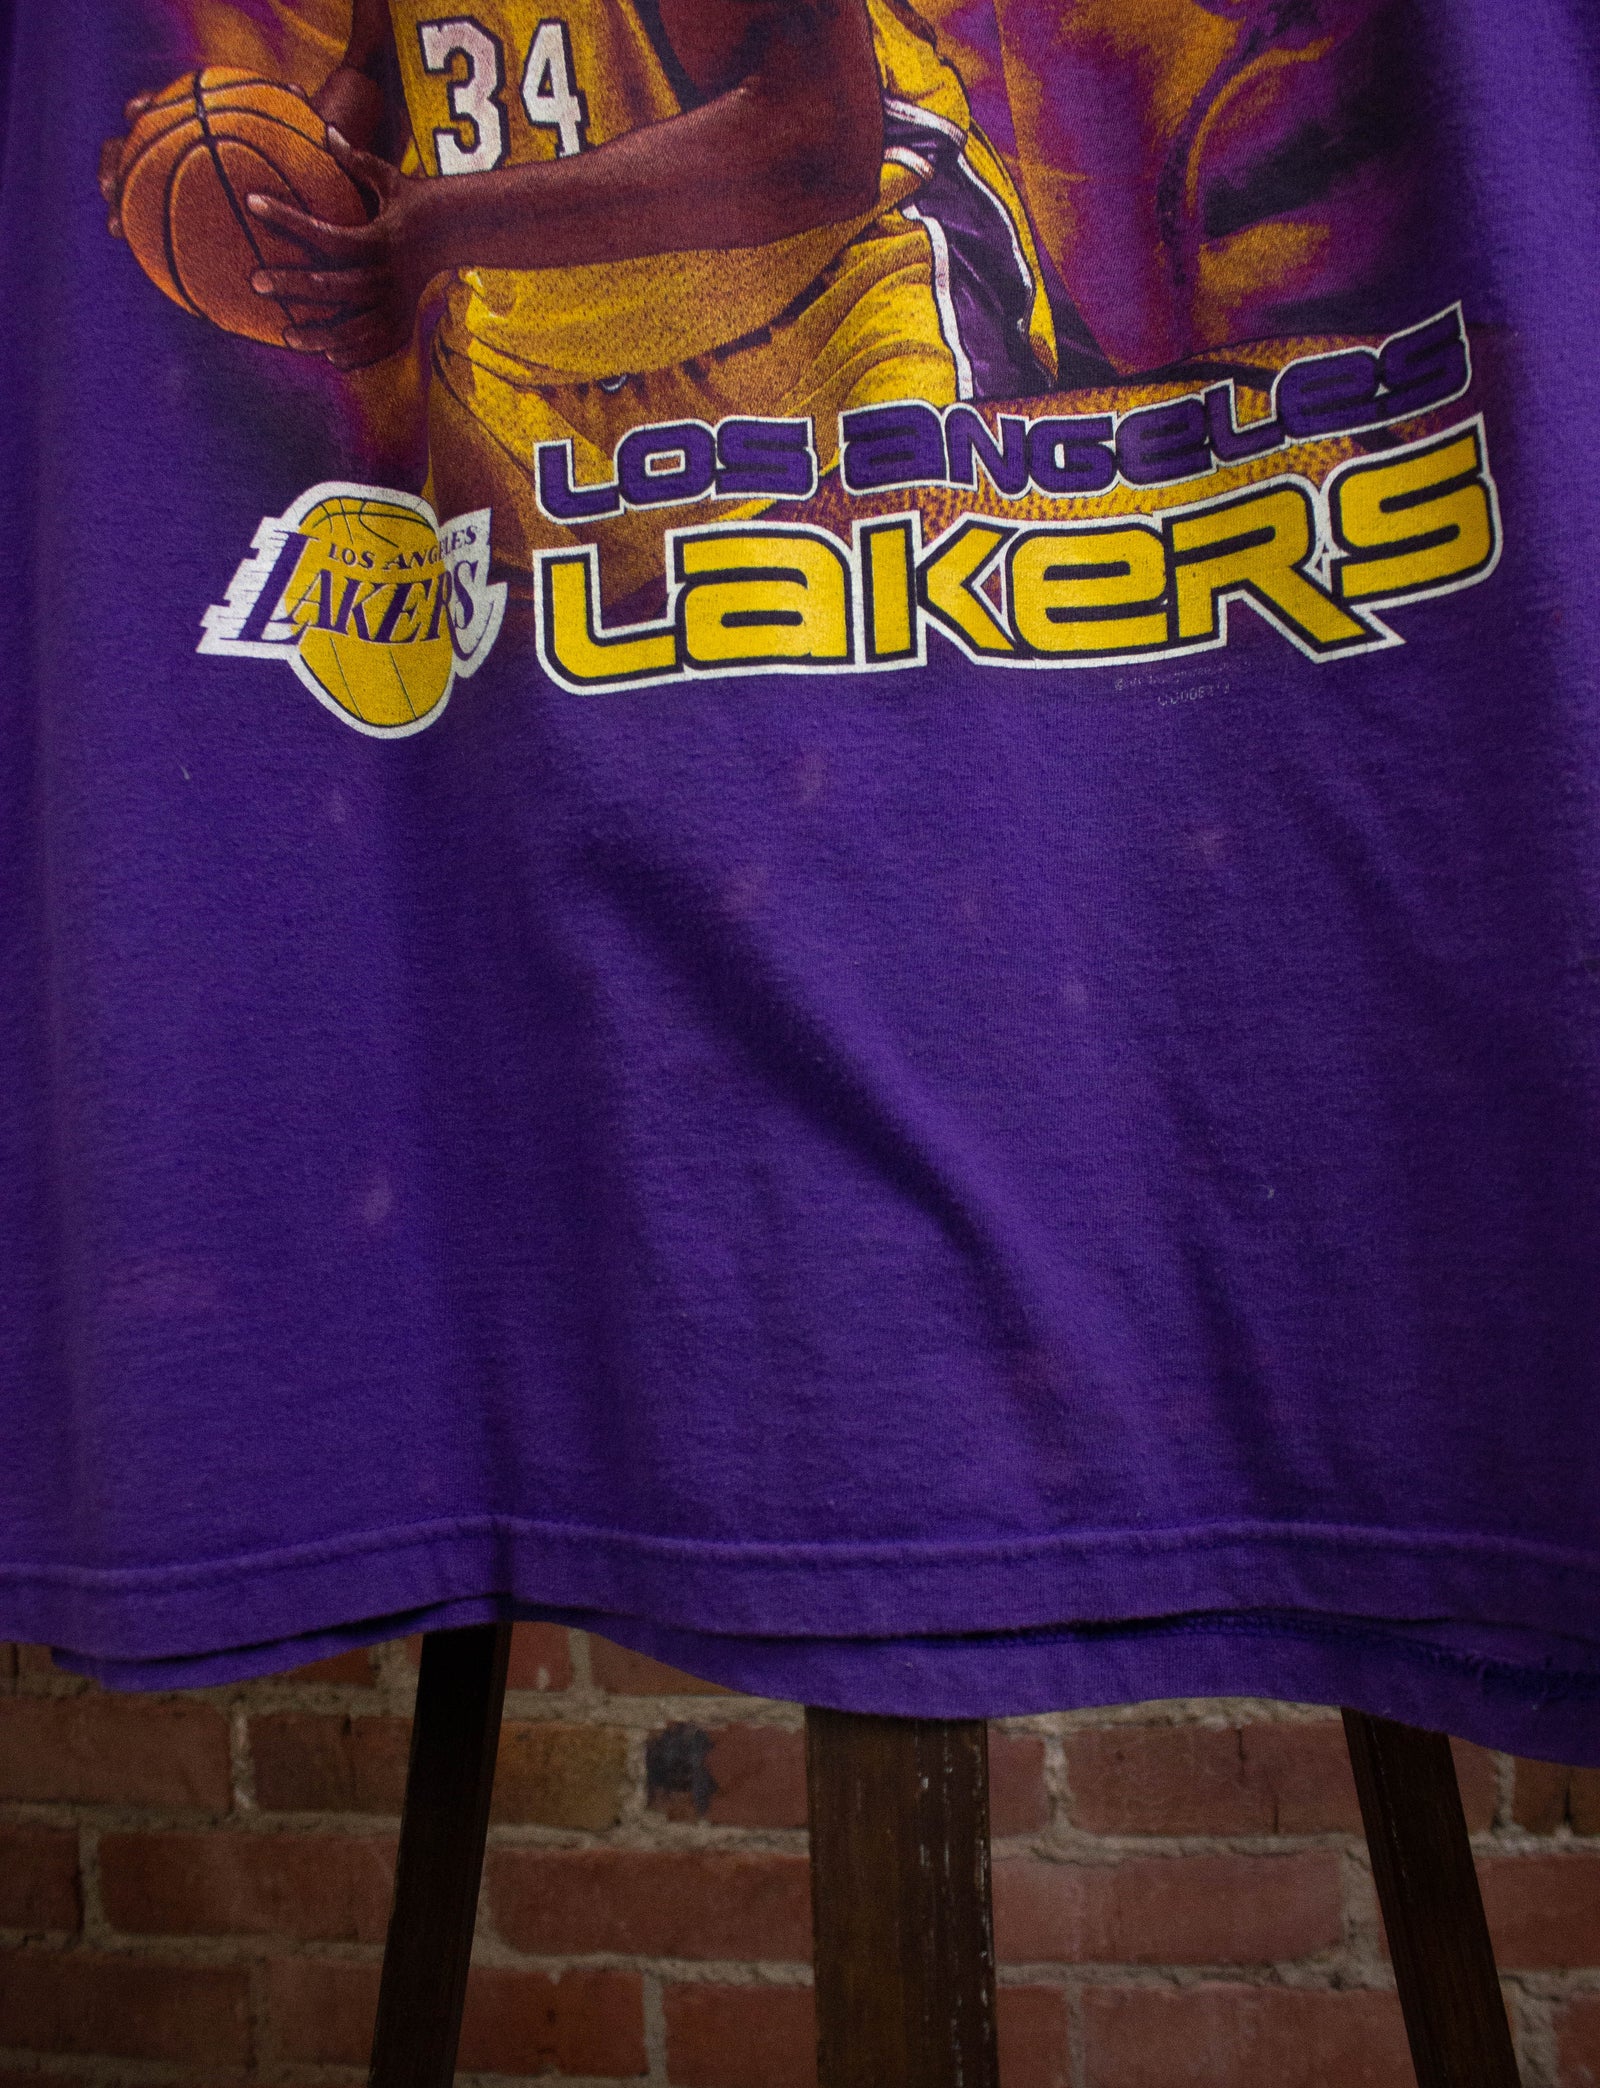 Lakers 23 Vintage T-Shirt Essential T-Shirt for Sale by